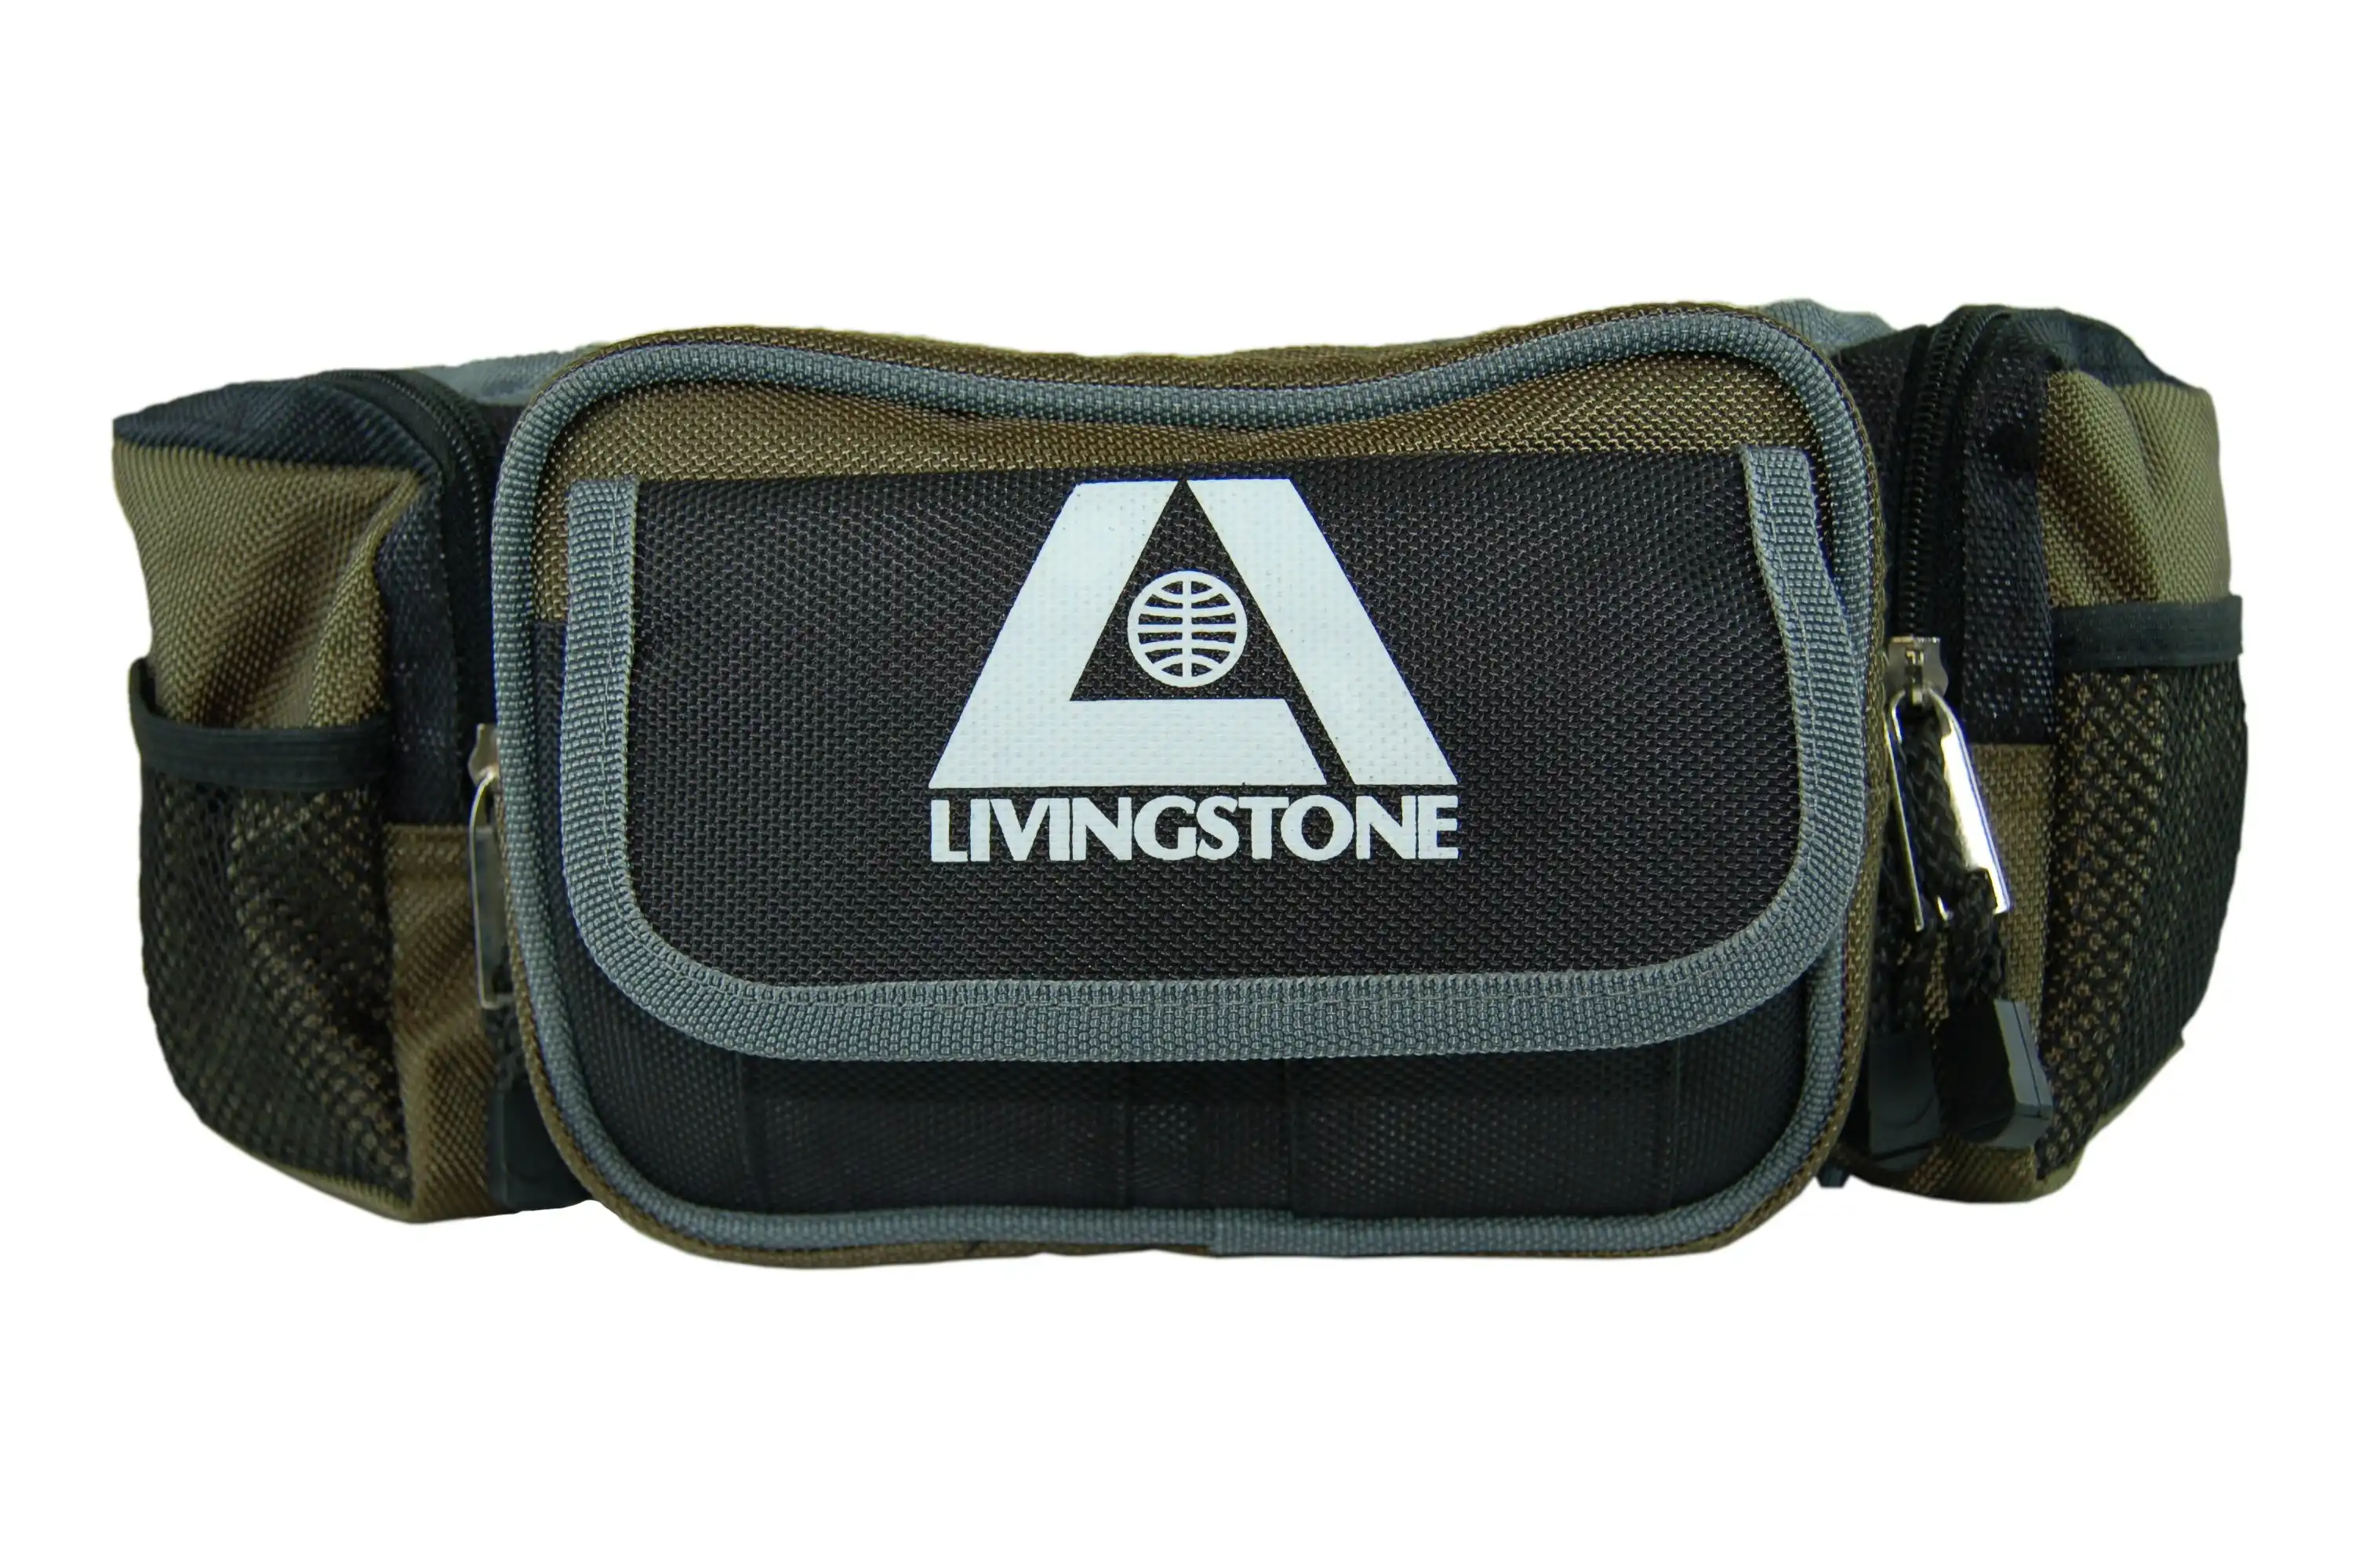 Livingstone Personal Sports First Aid Kit Complete Set In Bum Bag